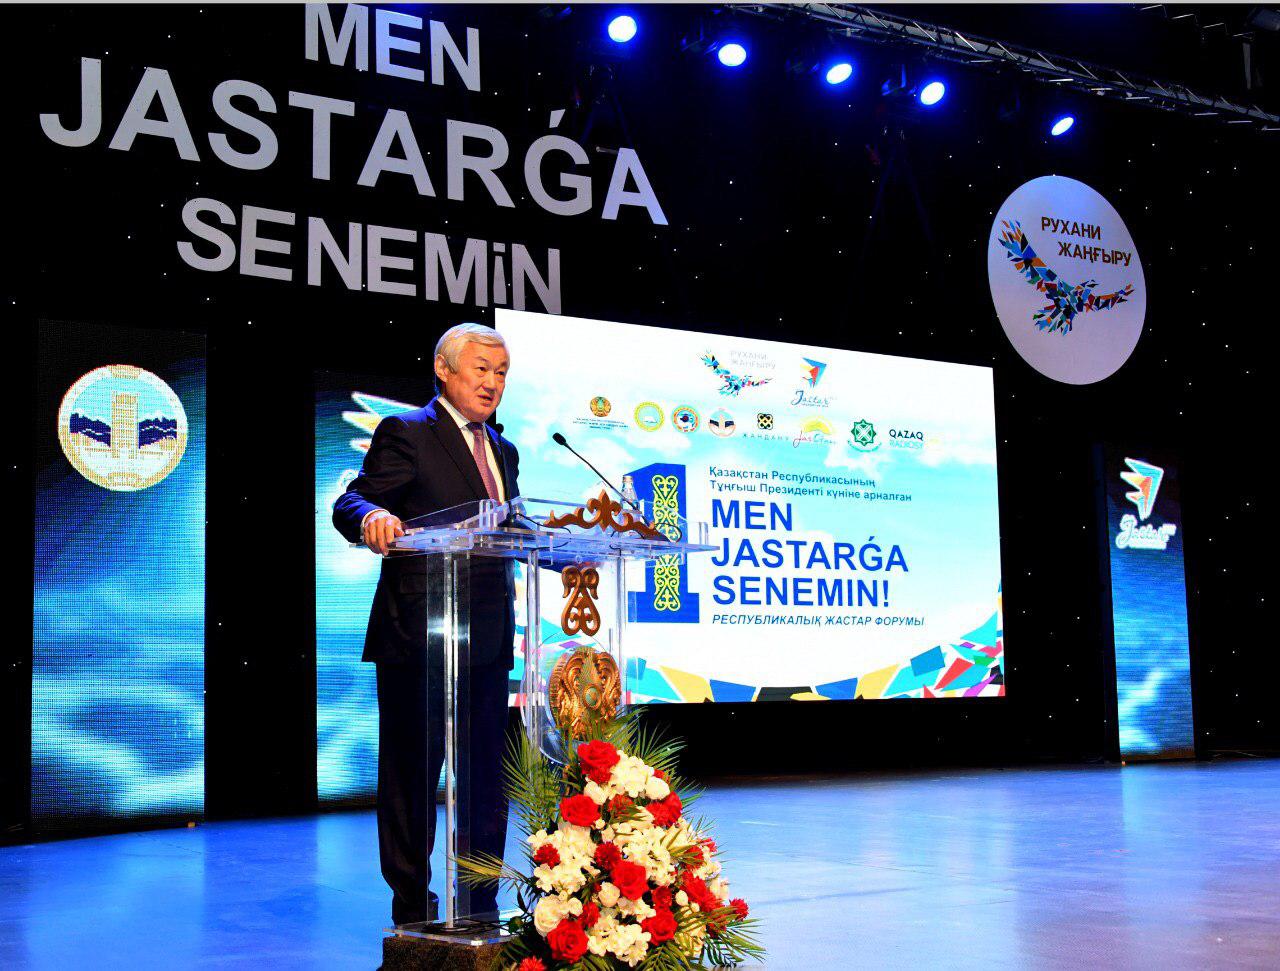 The task of the state is to help young people realize their potential - Saparbayev